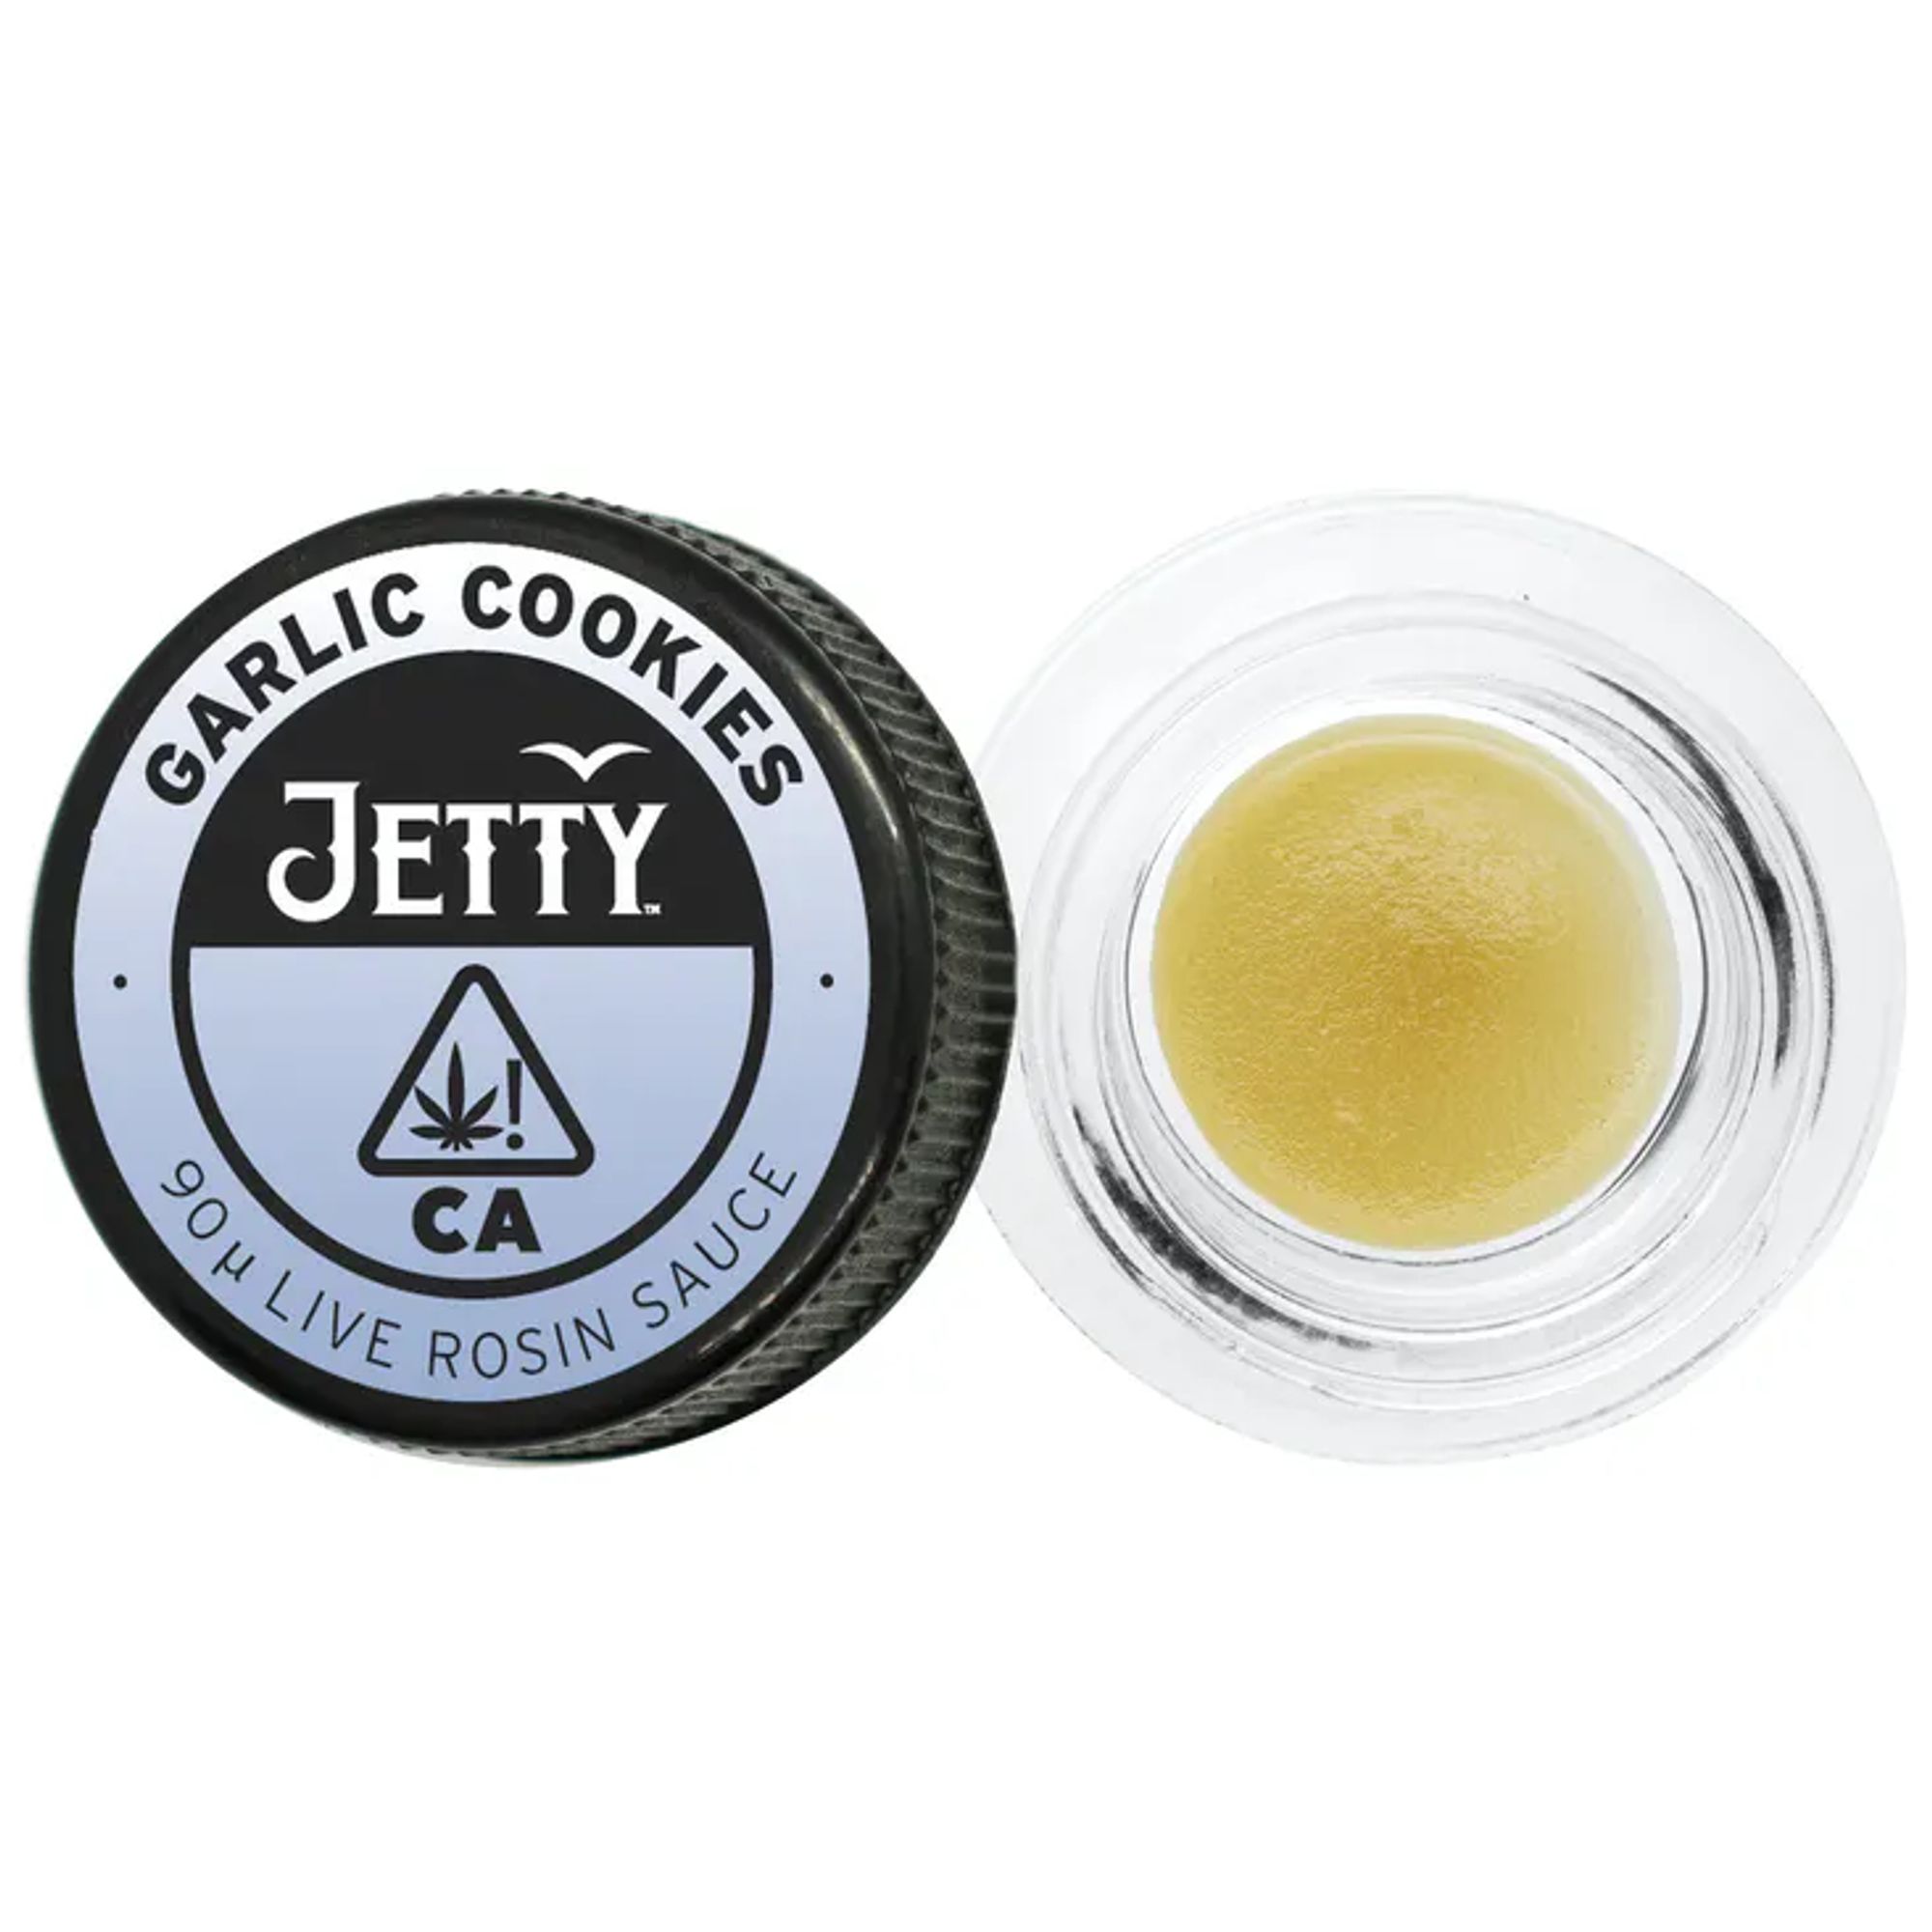 Garlic Cookies Live Rosin Concentrate 1g